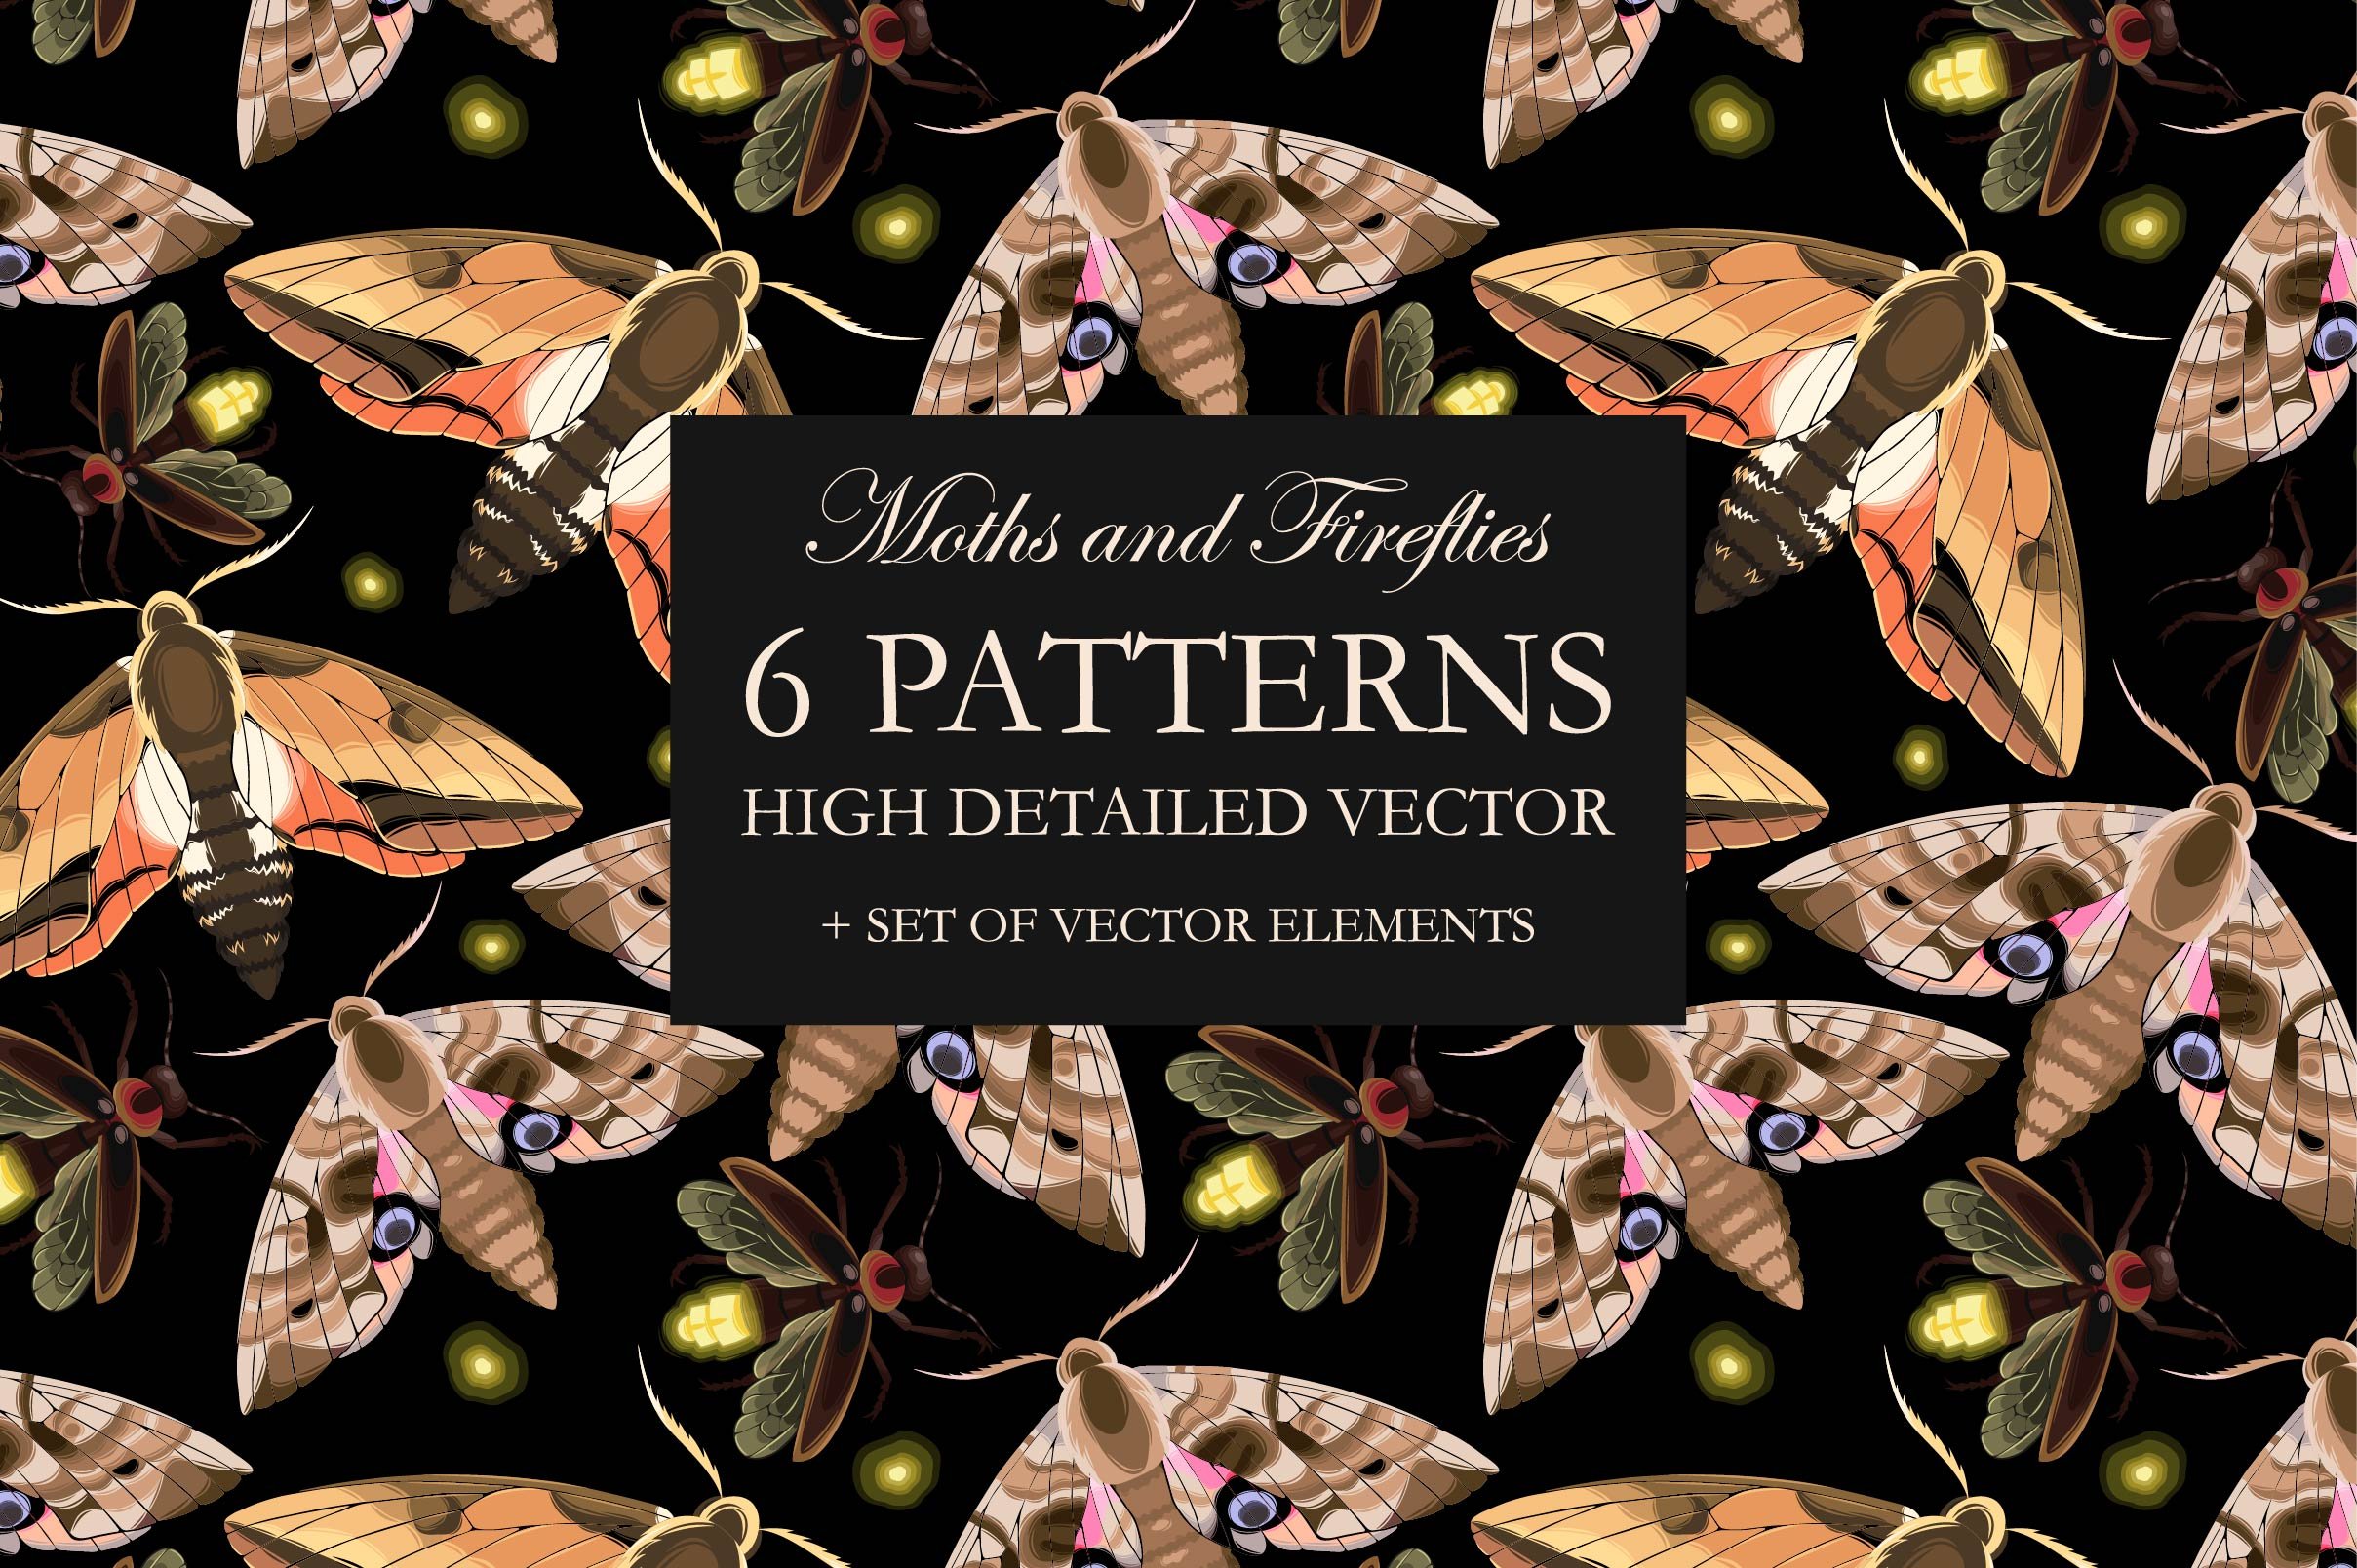 Moths and Fireflies Patterns cover image.